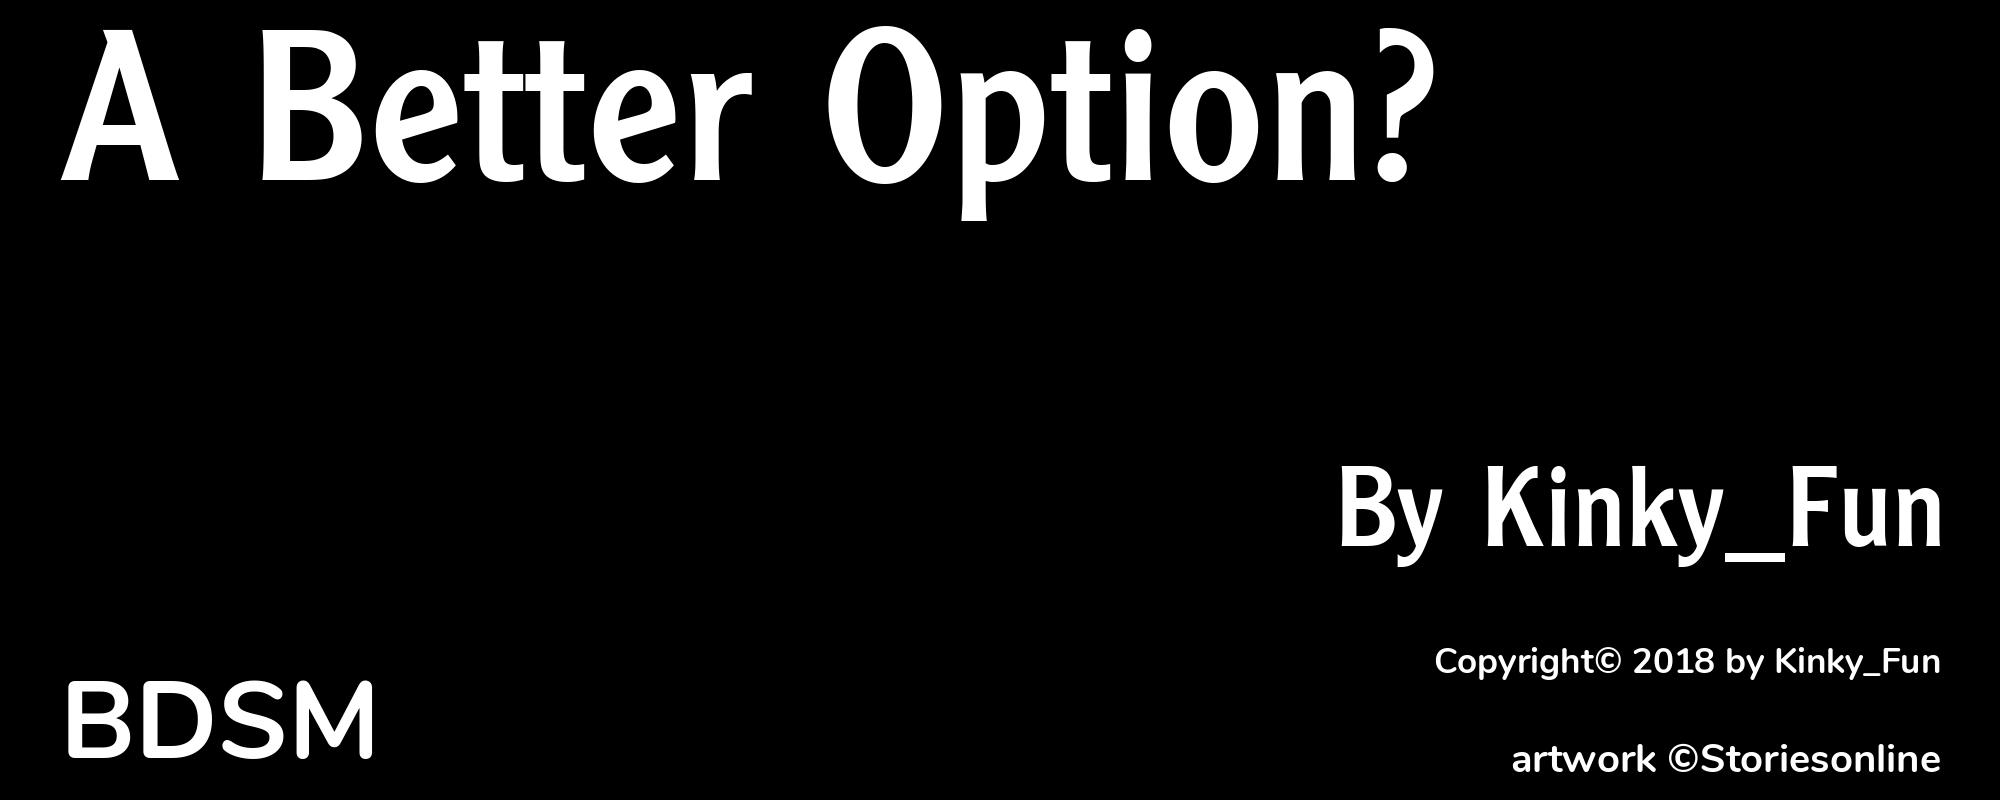 A Better Option? - Cover